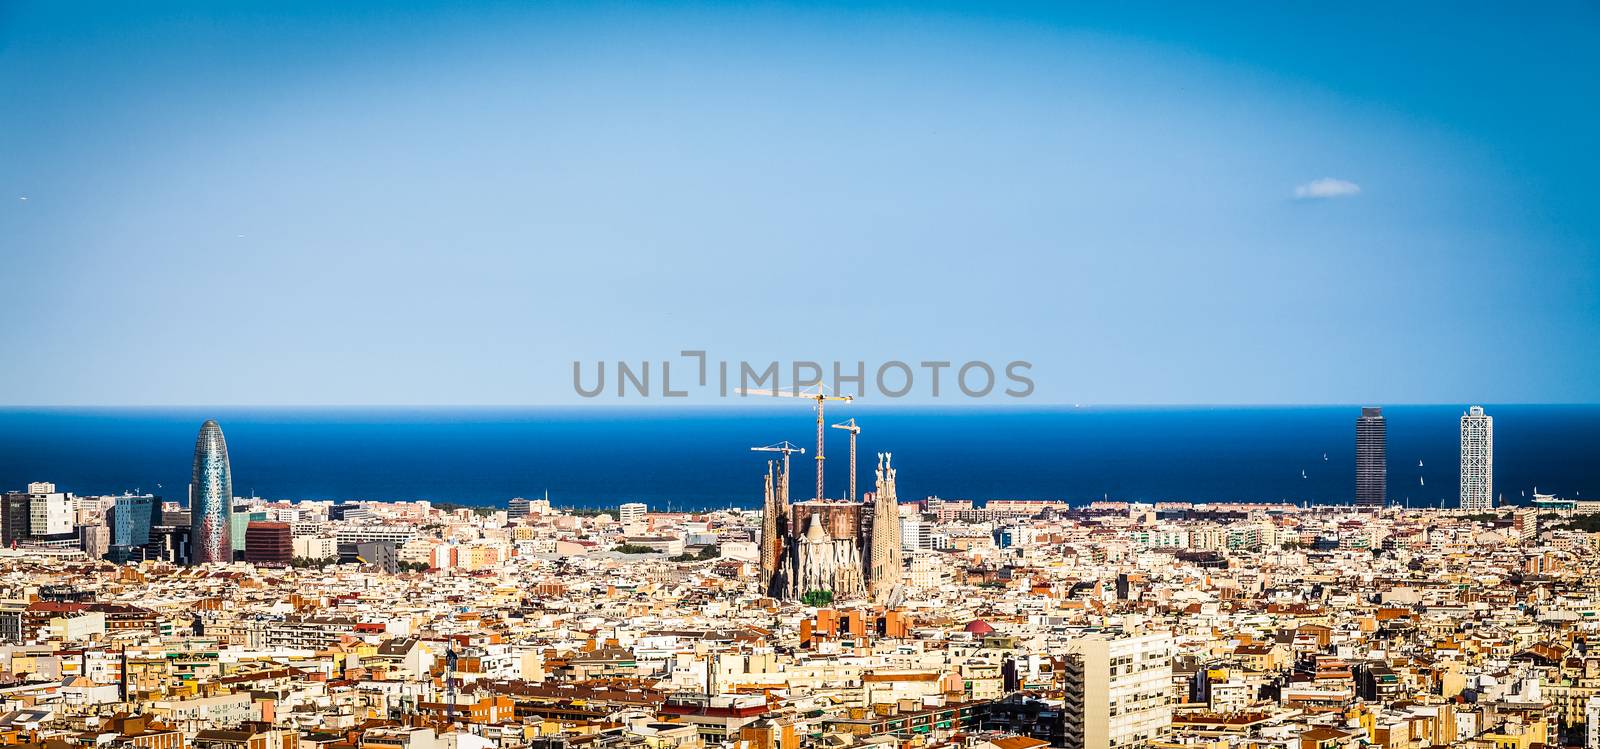 Barcelona - Spain. Wonderful blue sky during a sunny day on the city, with Sagrada Familia view.